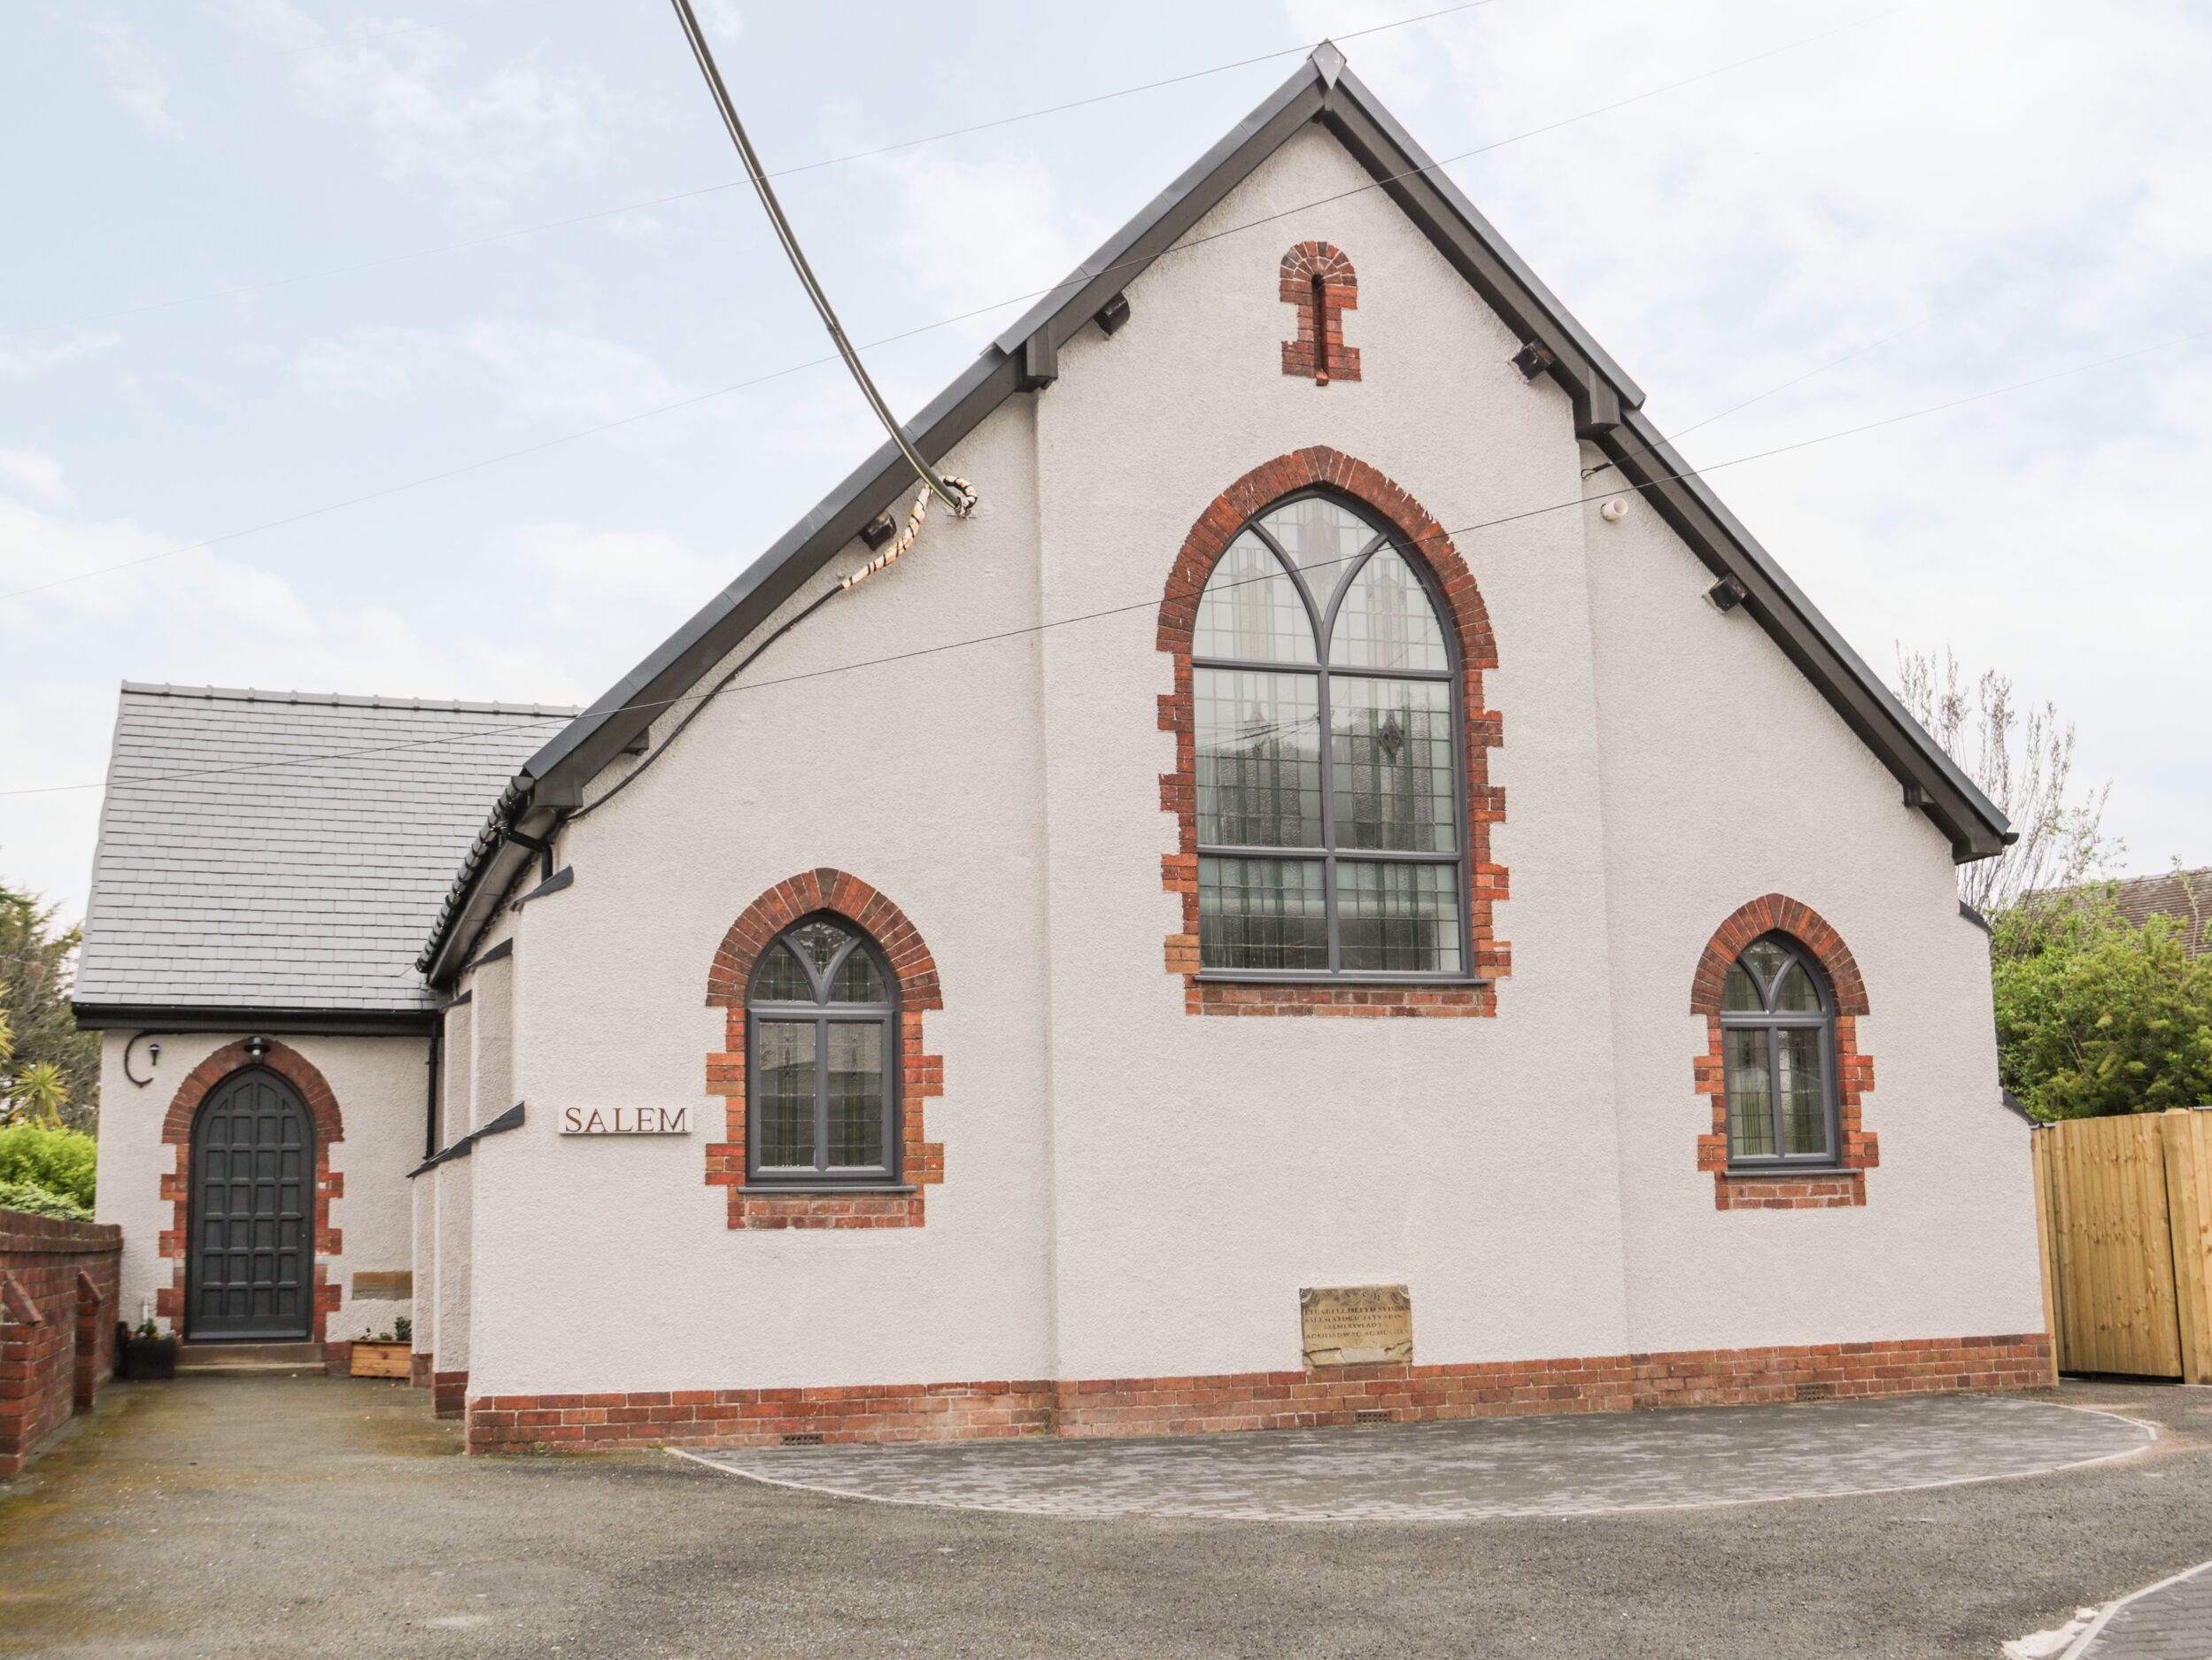 Salem in Meliden in Denbighshire. Six-bedroom, converted chapel with hot tub and games room. Stylish